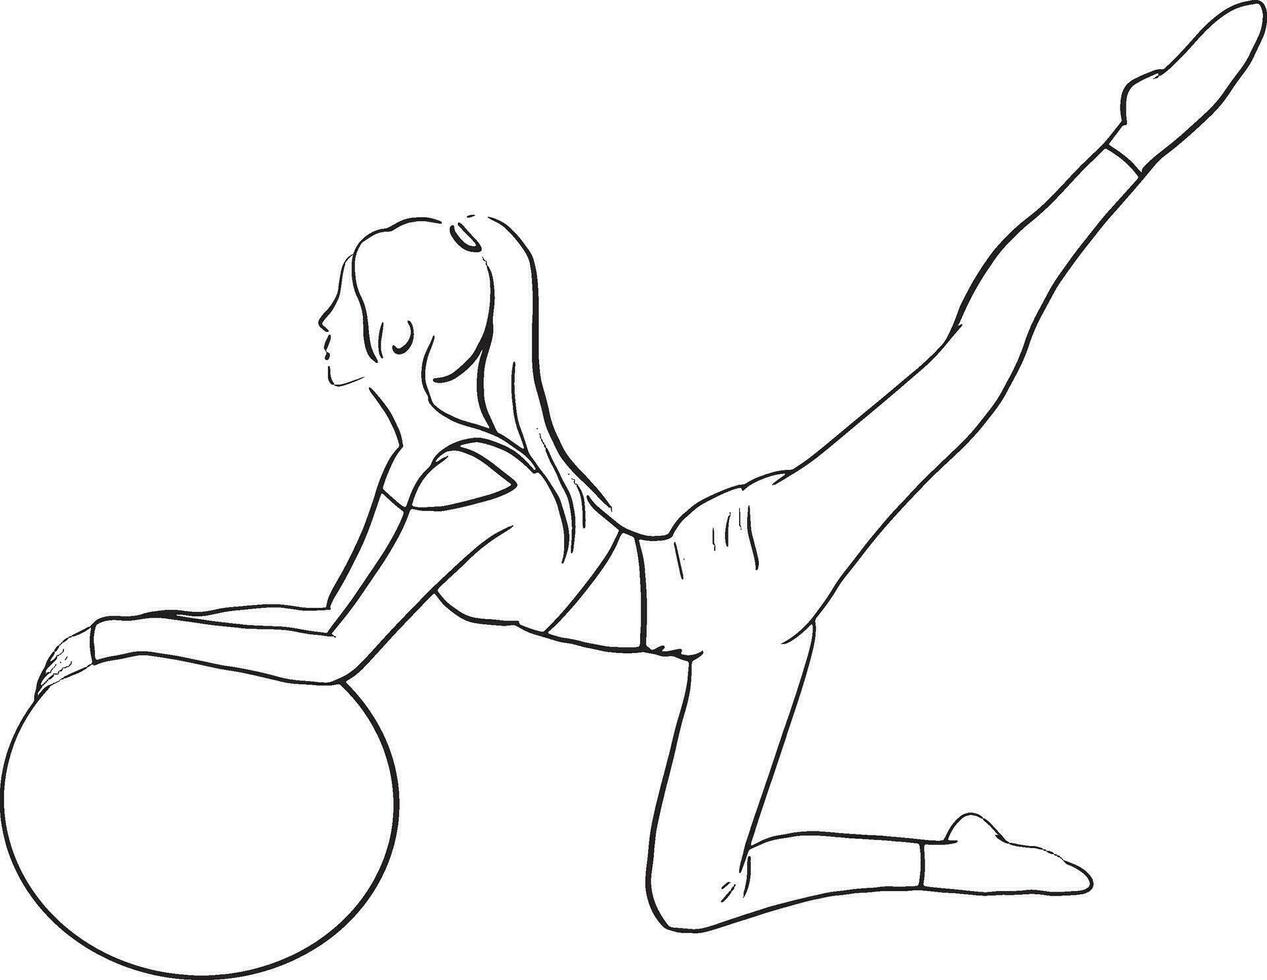 Pilates training concept vector illustration. Woman practicing Pilates with ball.